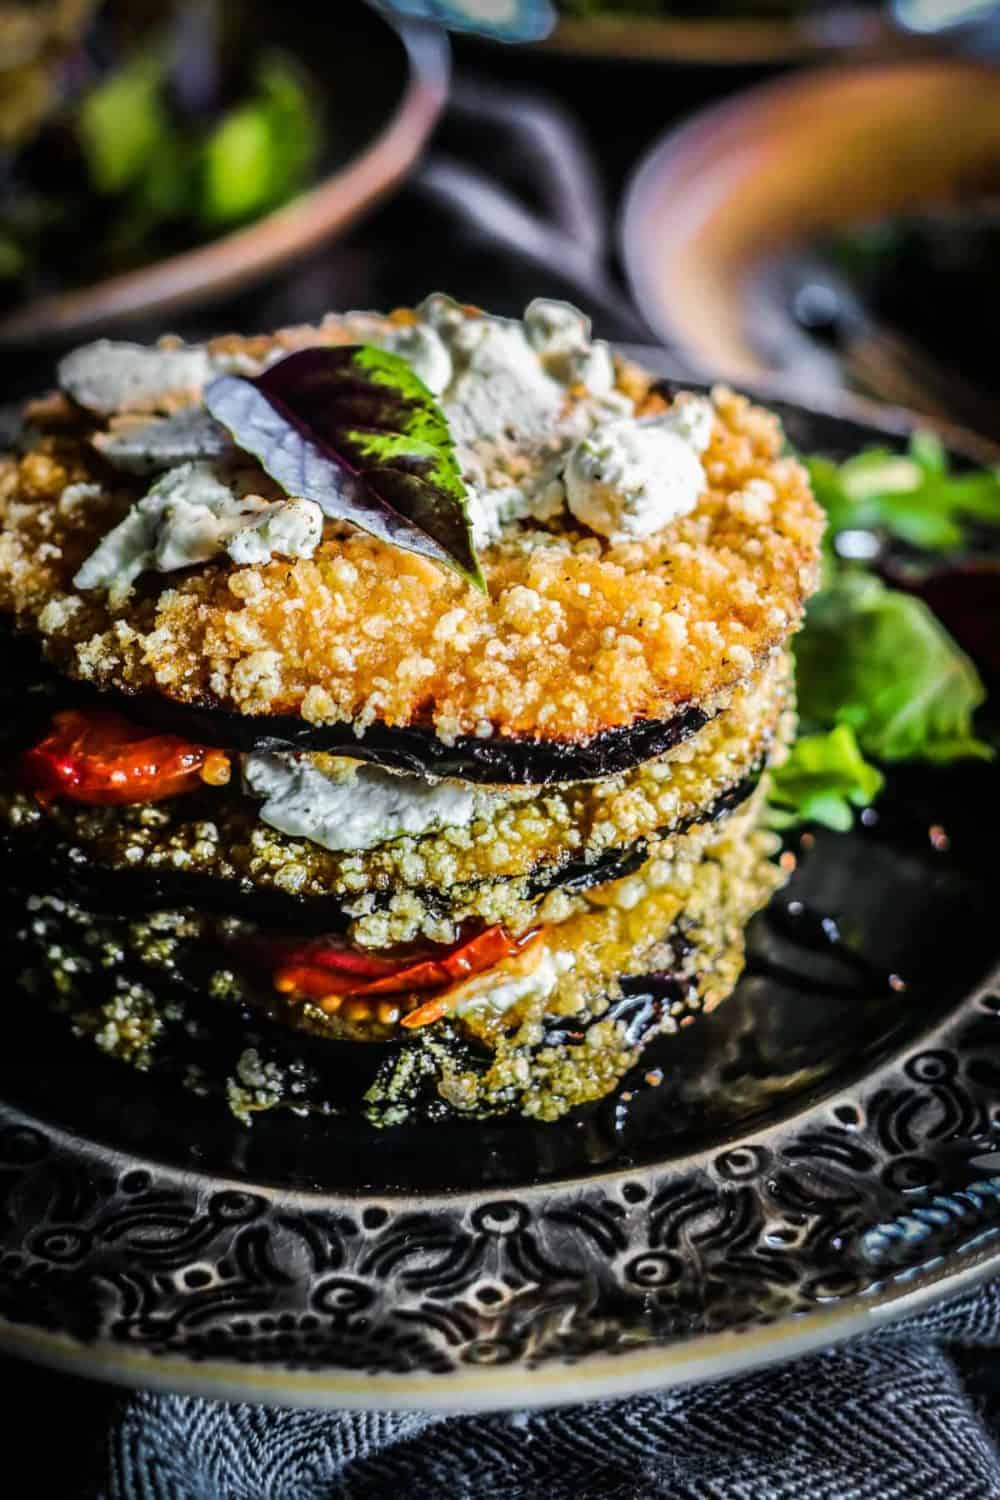 Chef Hany Ali's Fire Roasted Eggplant & Blistered Shishito Peppers ...